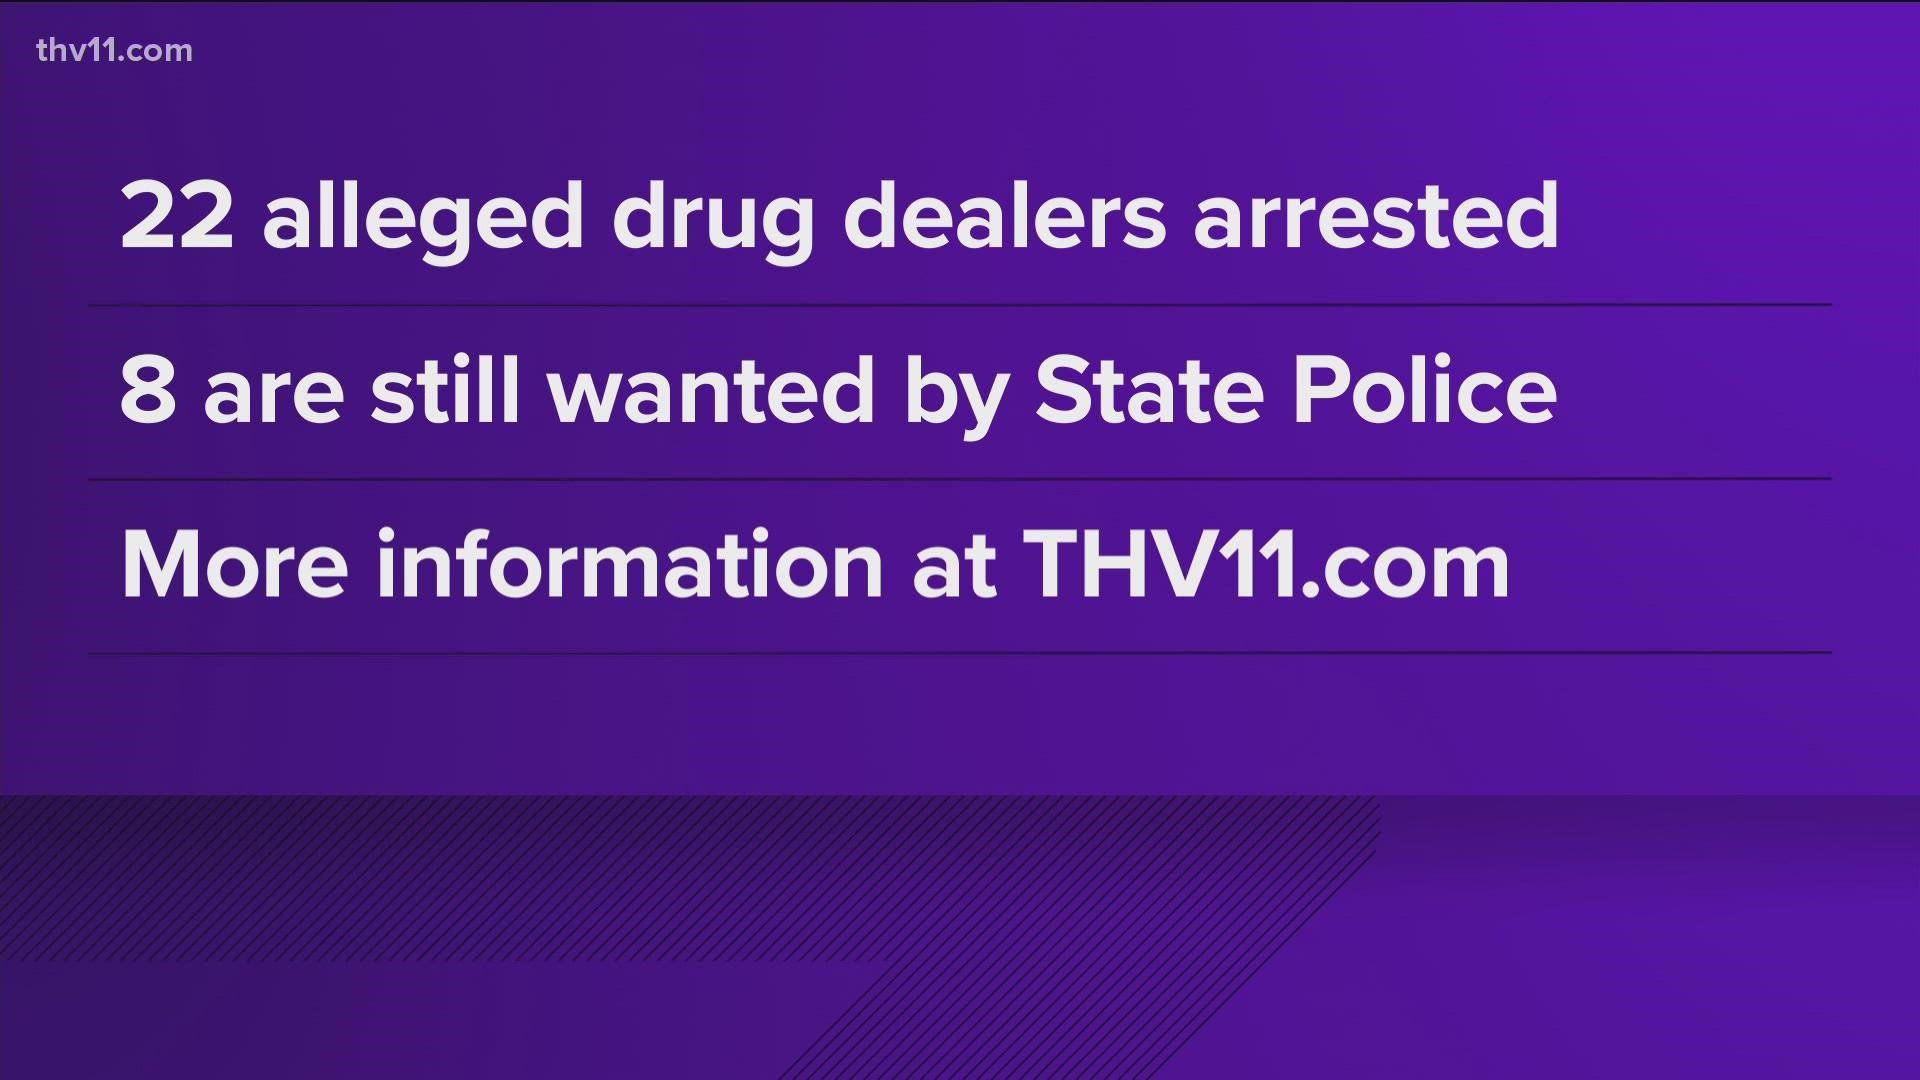 Undercover buyers spent 11 months on a narcotic sting operation that led to 30 arrest warrants. Officers are asking for your help finding the remaining 8 suspects.